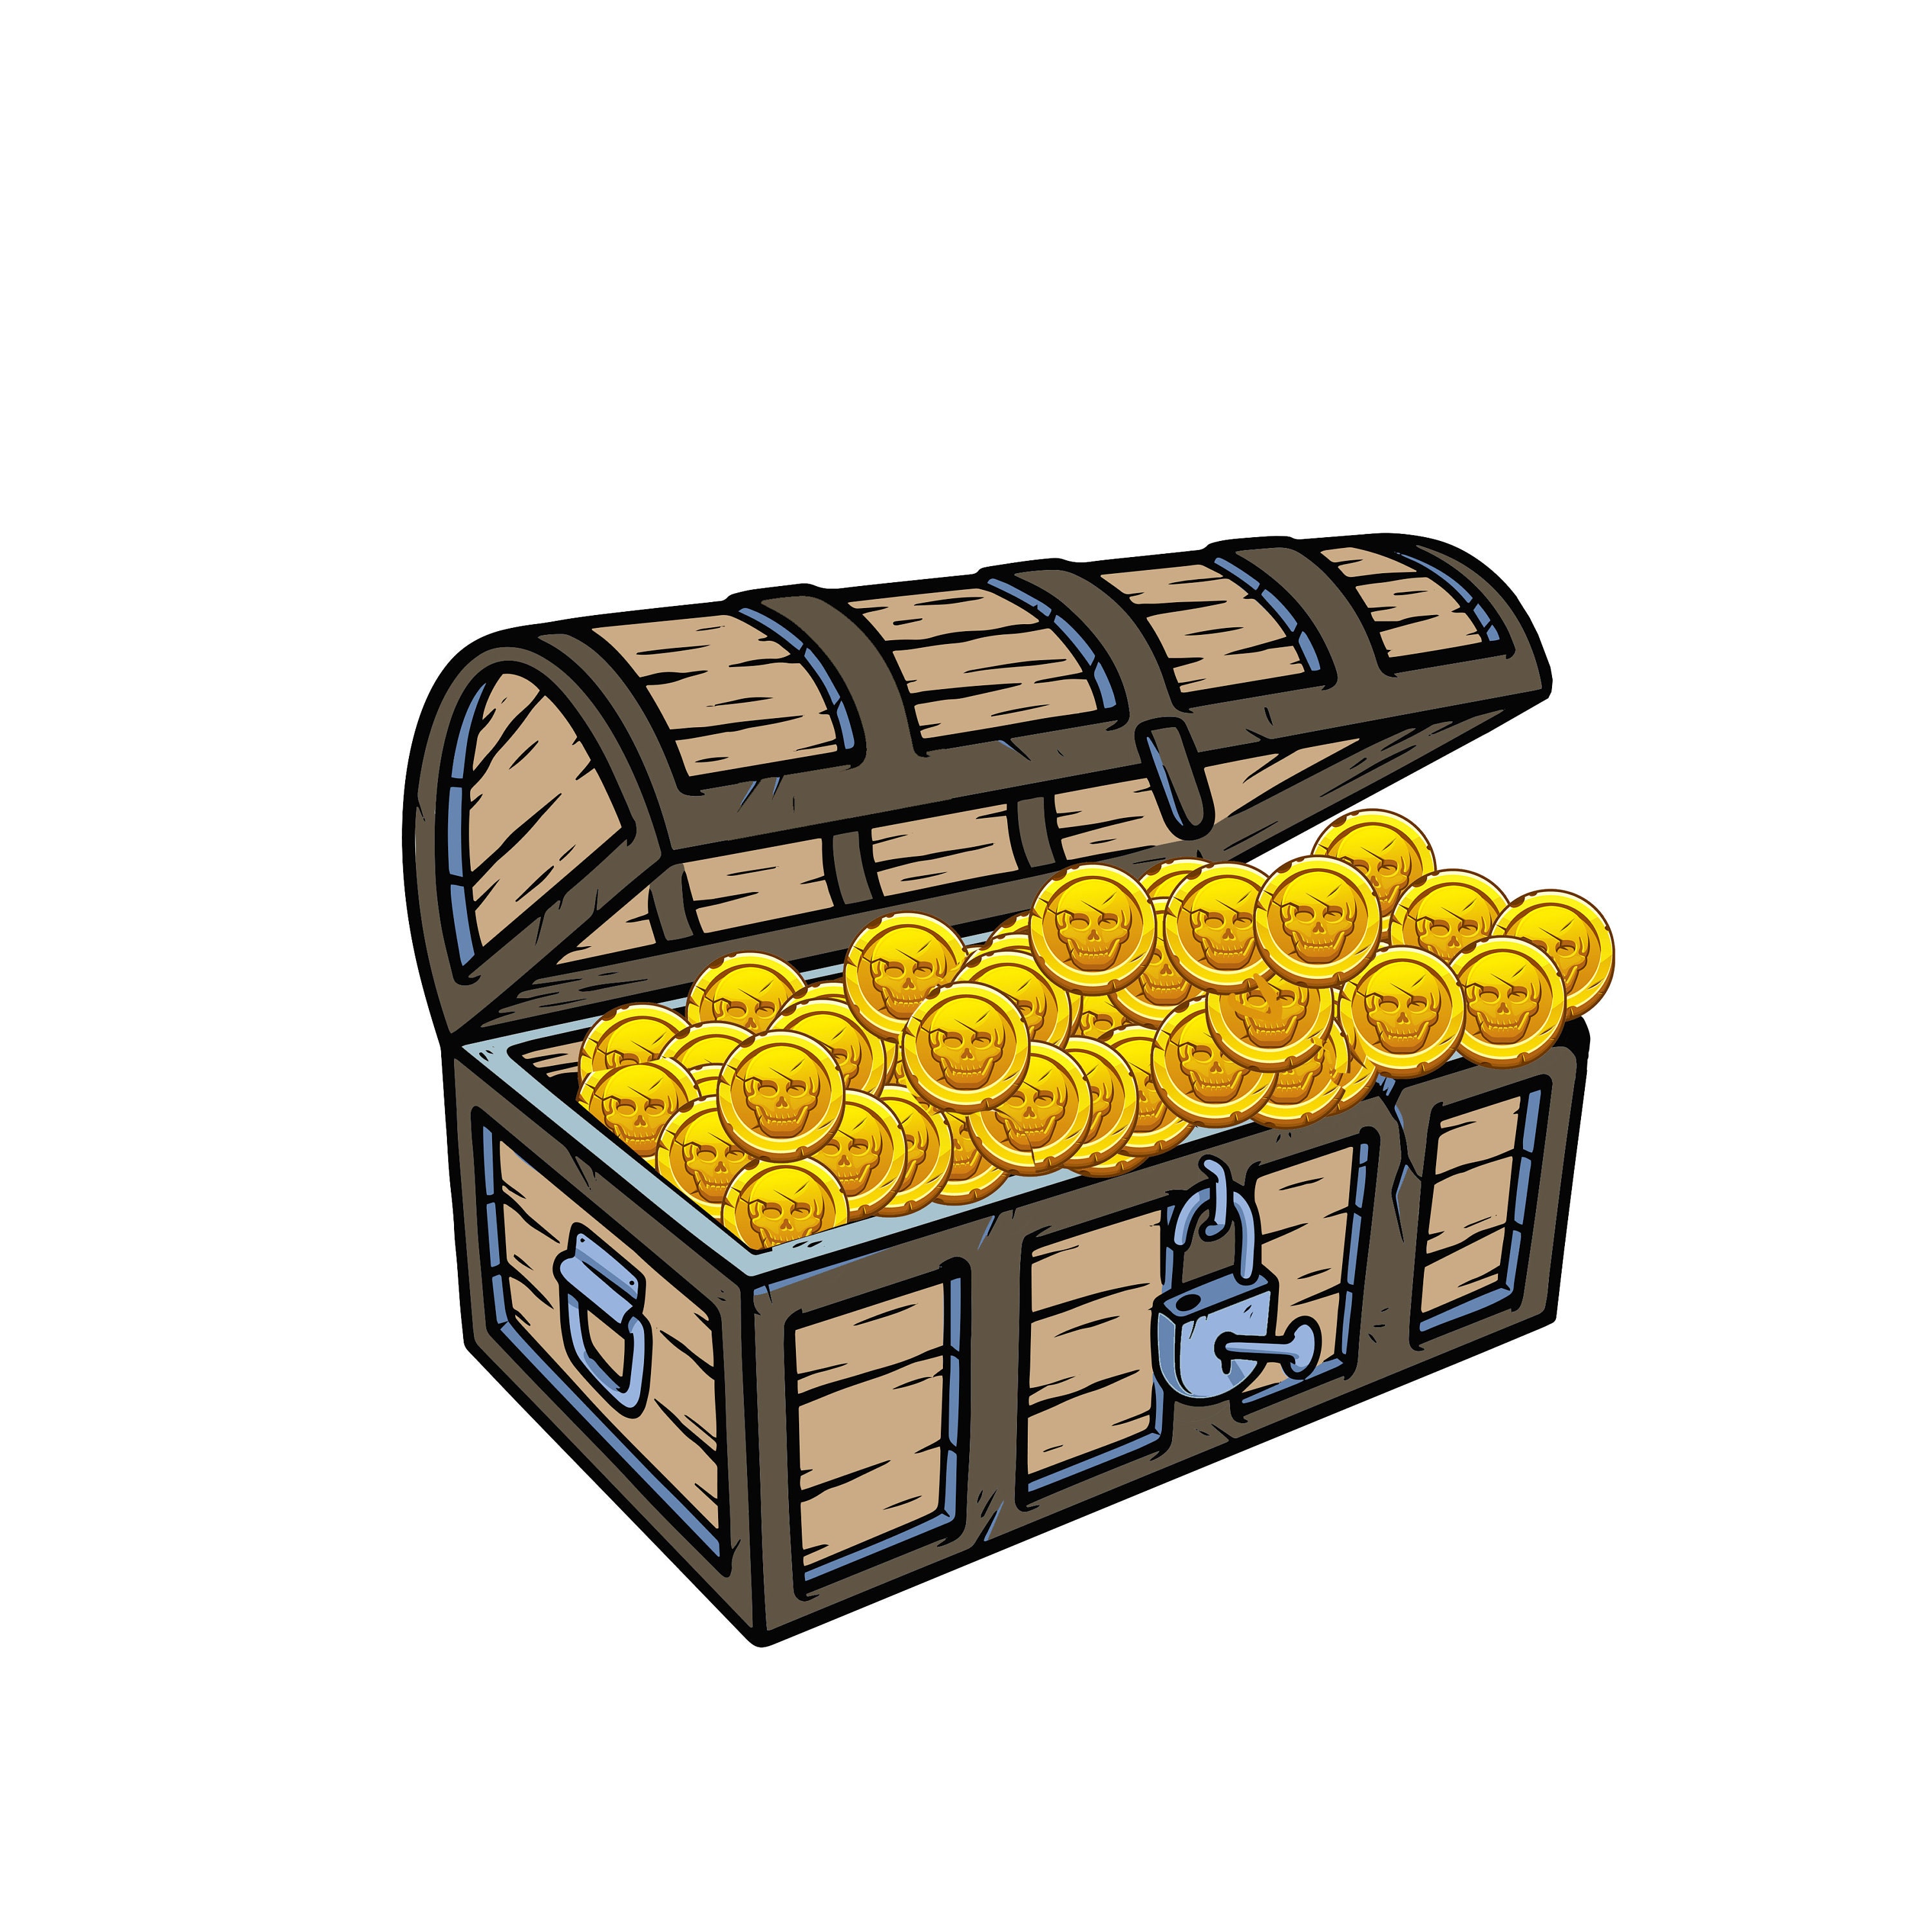 Gold Chest PNG Transparent Images Free Download, Vector Files